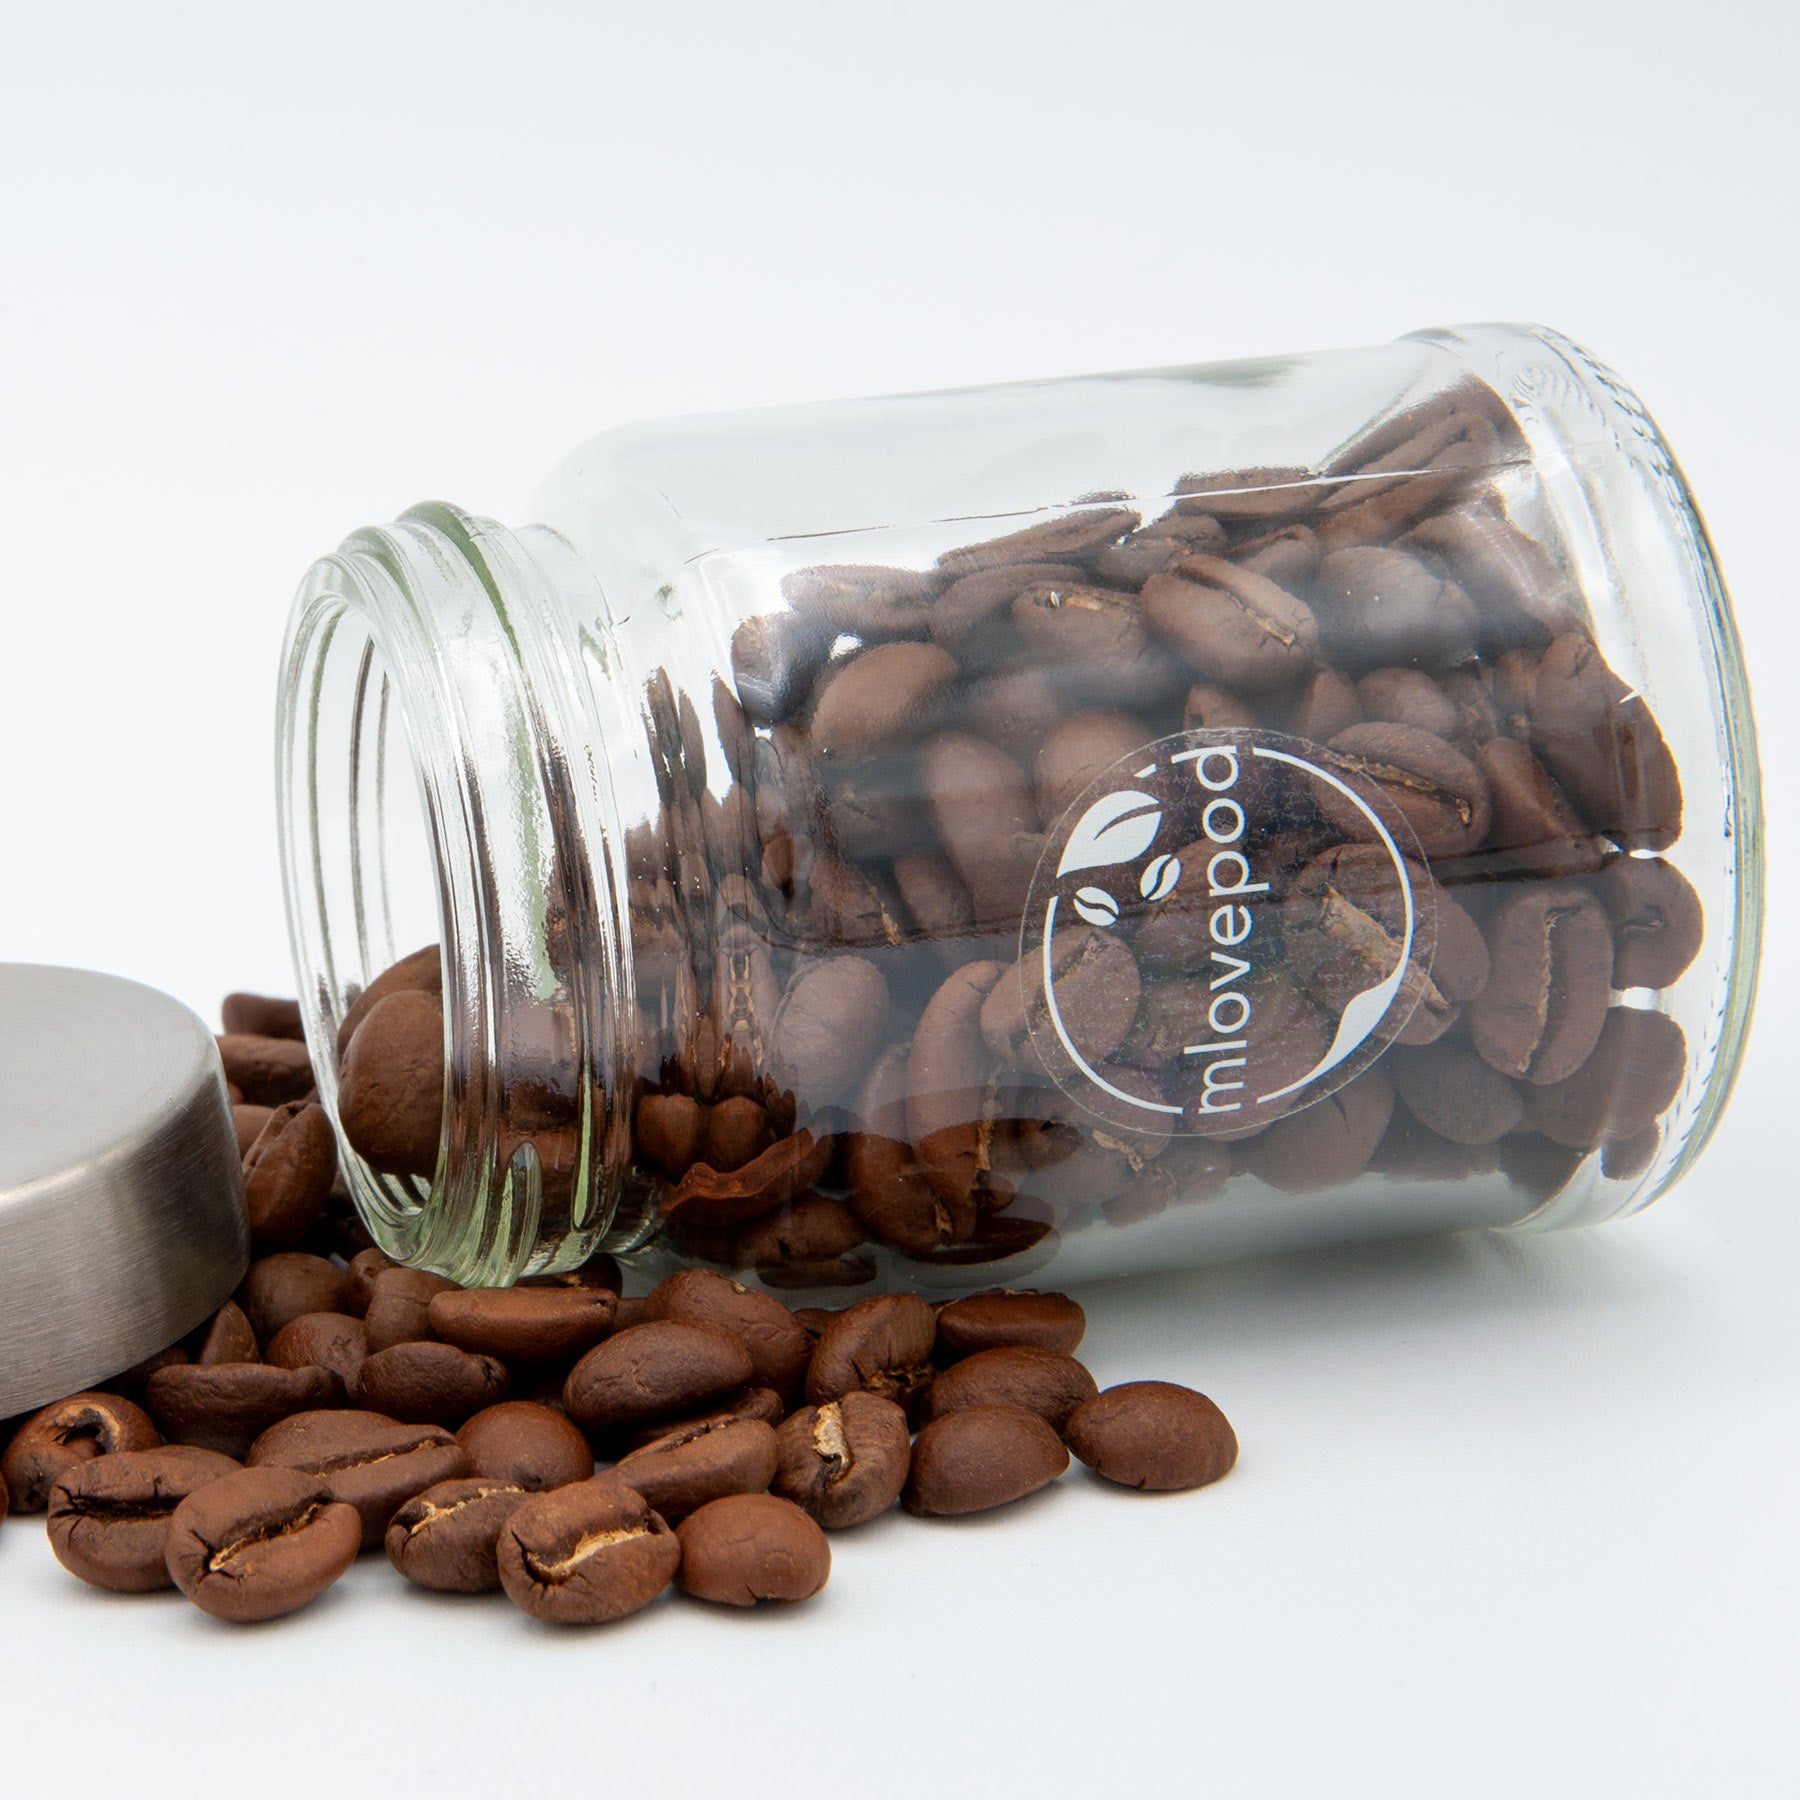 Glass Jar with Stainless Steel Cover for mlovepod Grinder